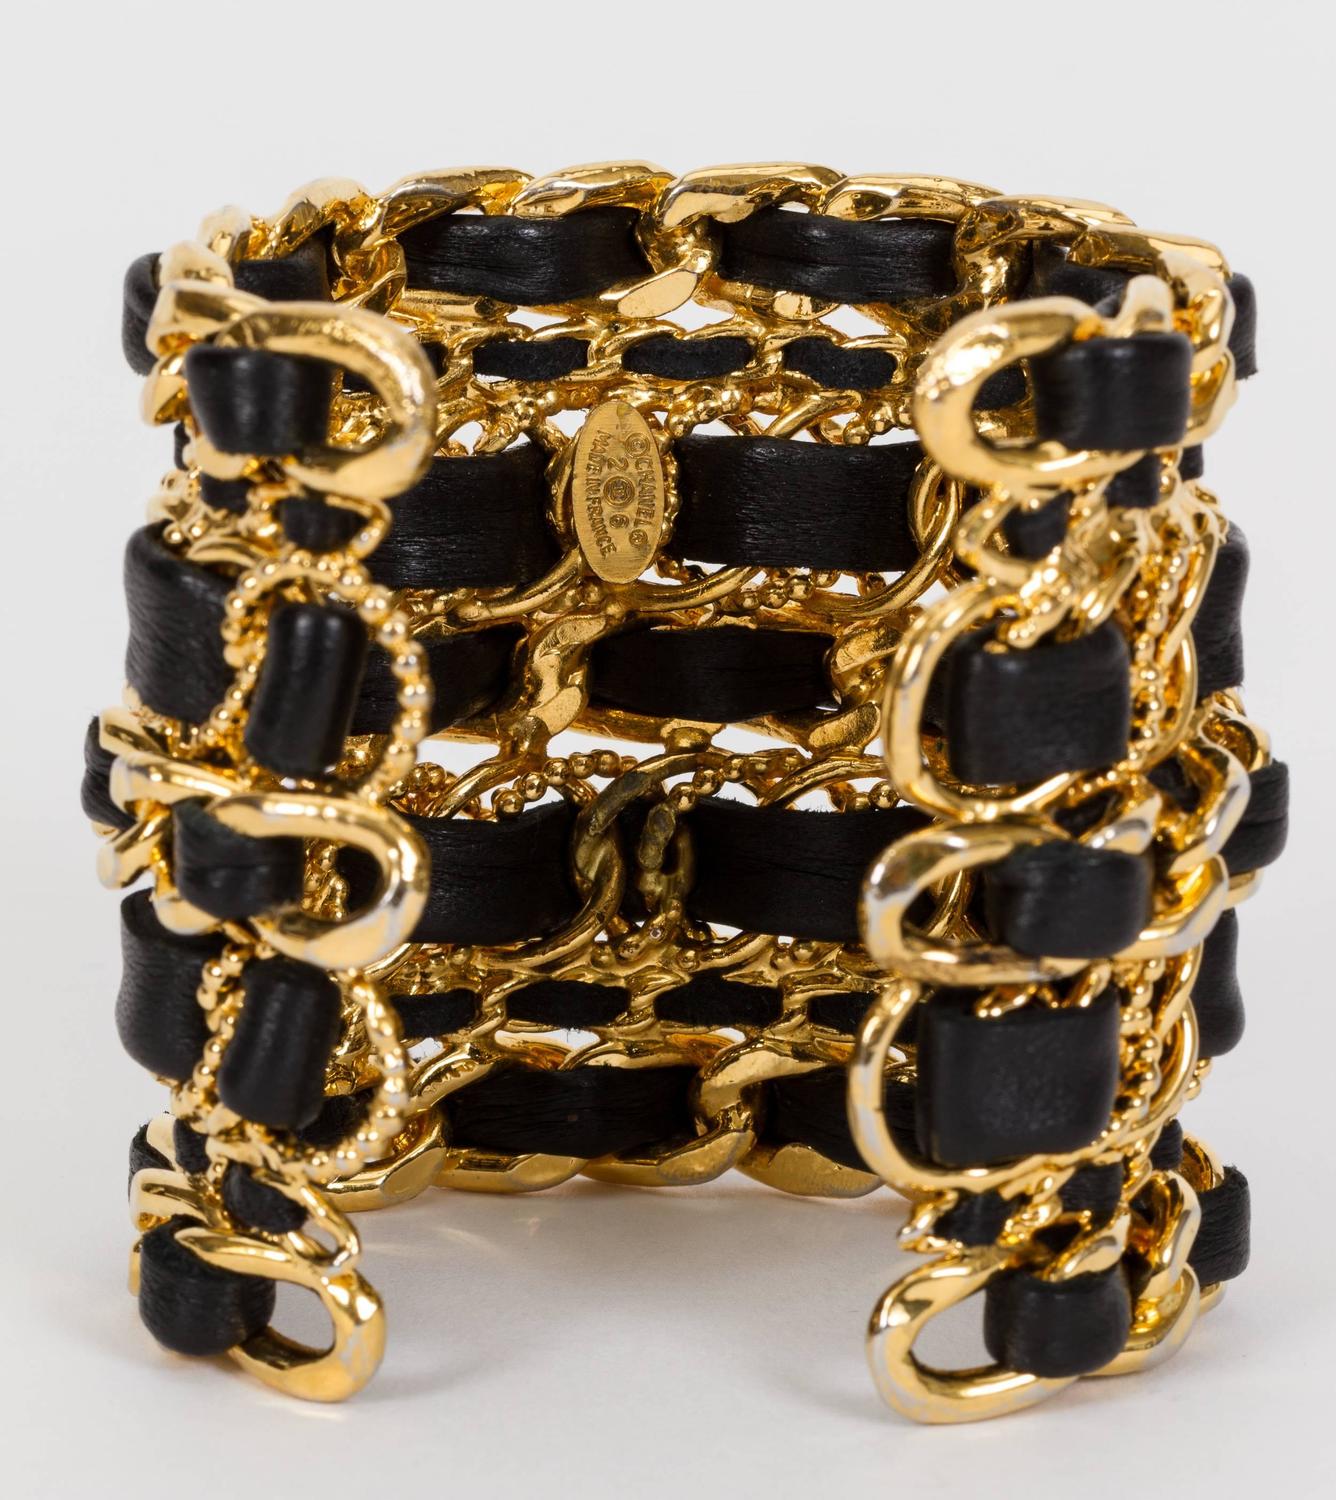 Chanel Rare 1980's Oversized Leather Chain Cuff Bracelet at 1stdibs